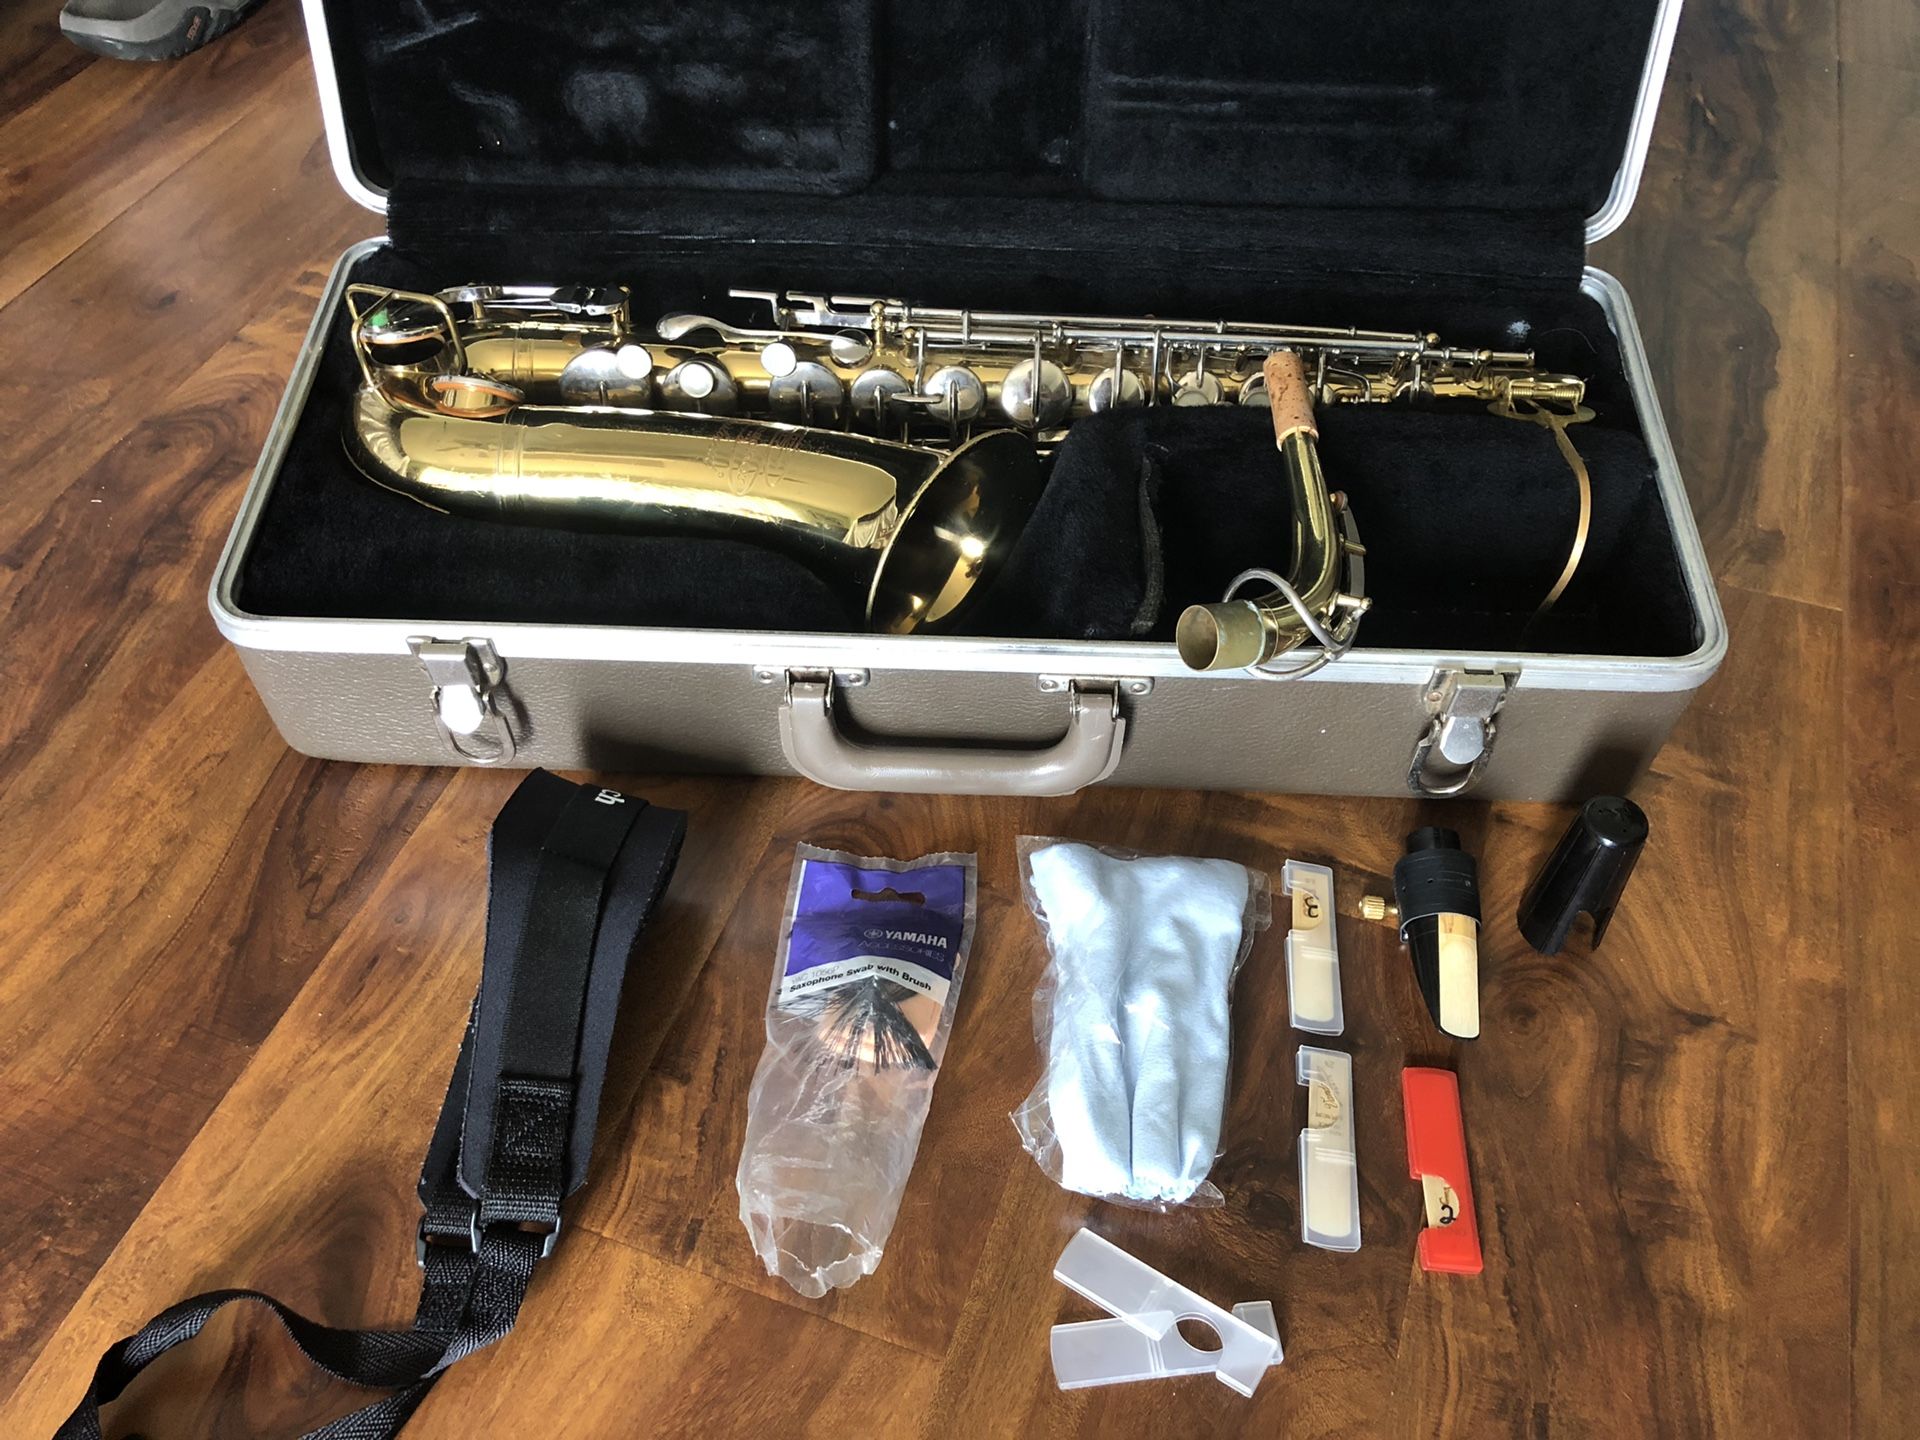 Buescher Aristocrat... Last full tune up, new pads etc. was March 2019. Hasn’t been used since May 2019.